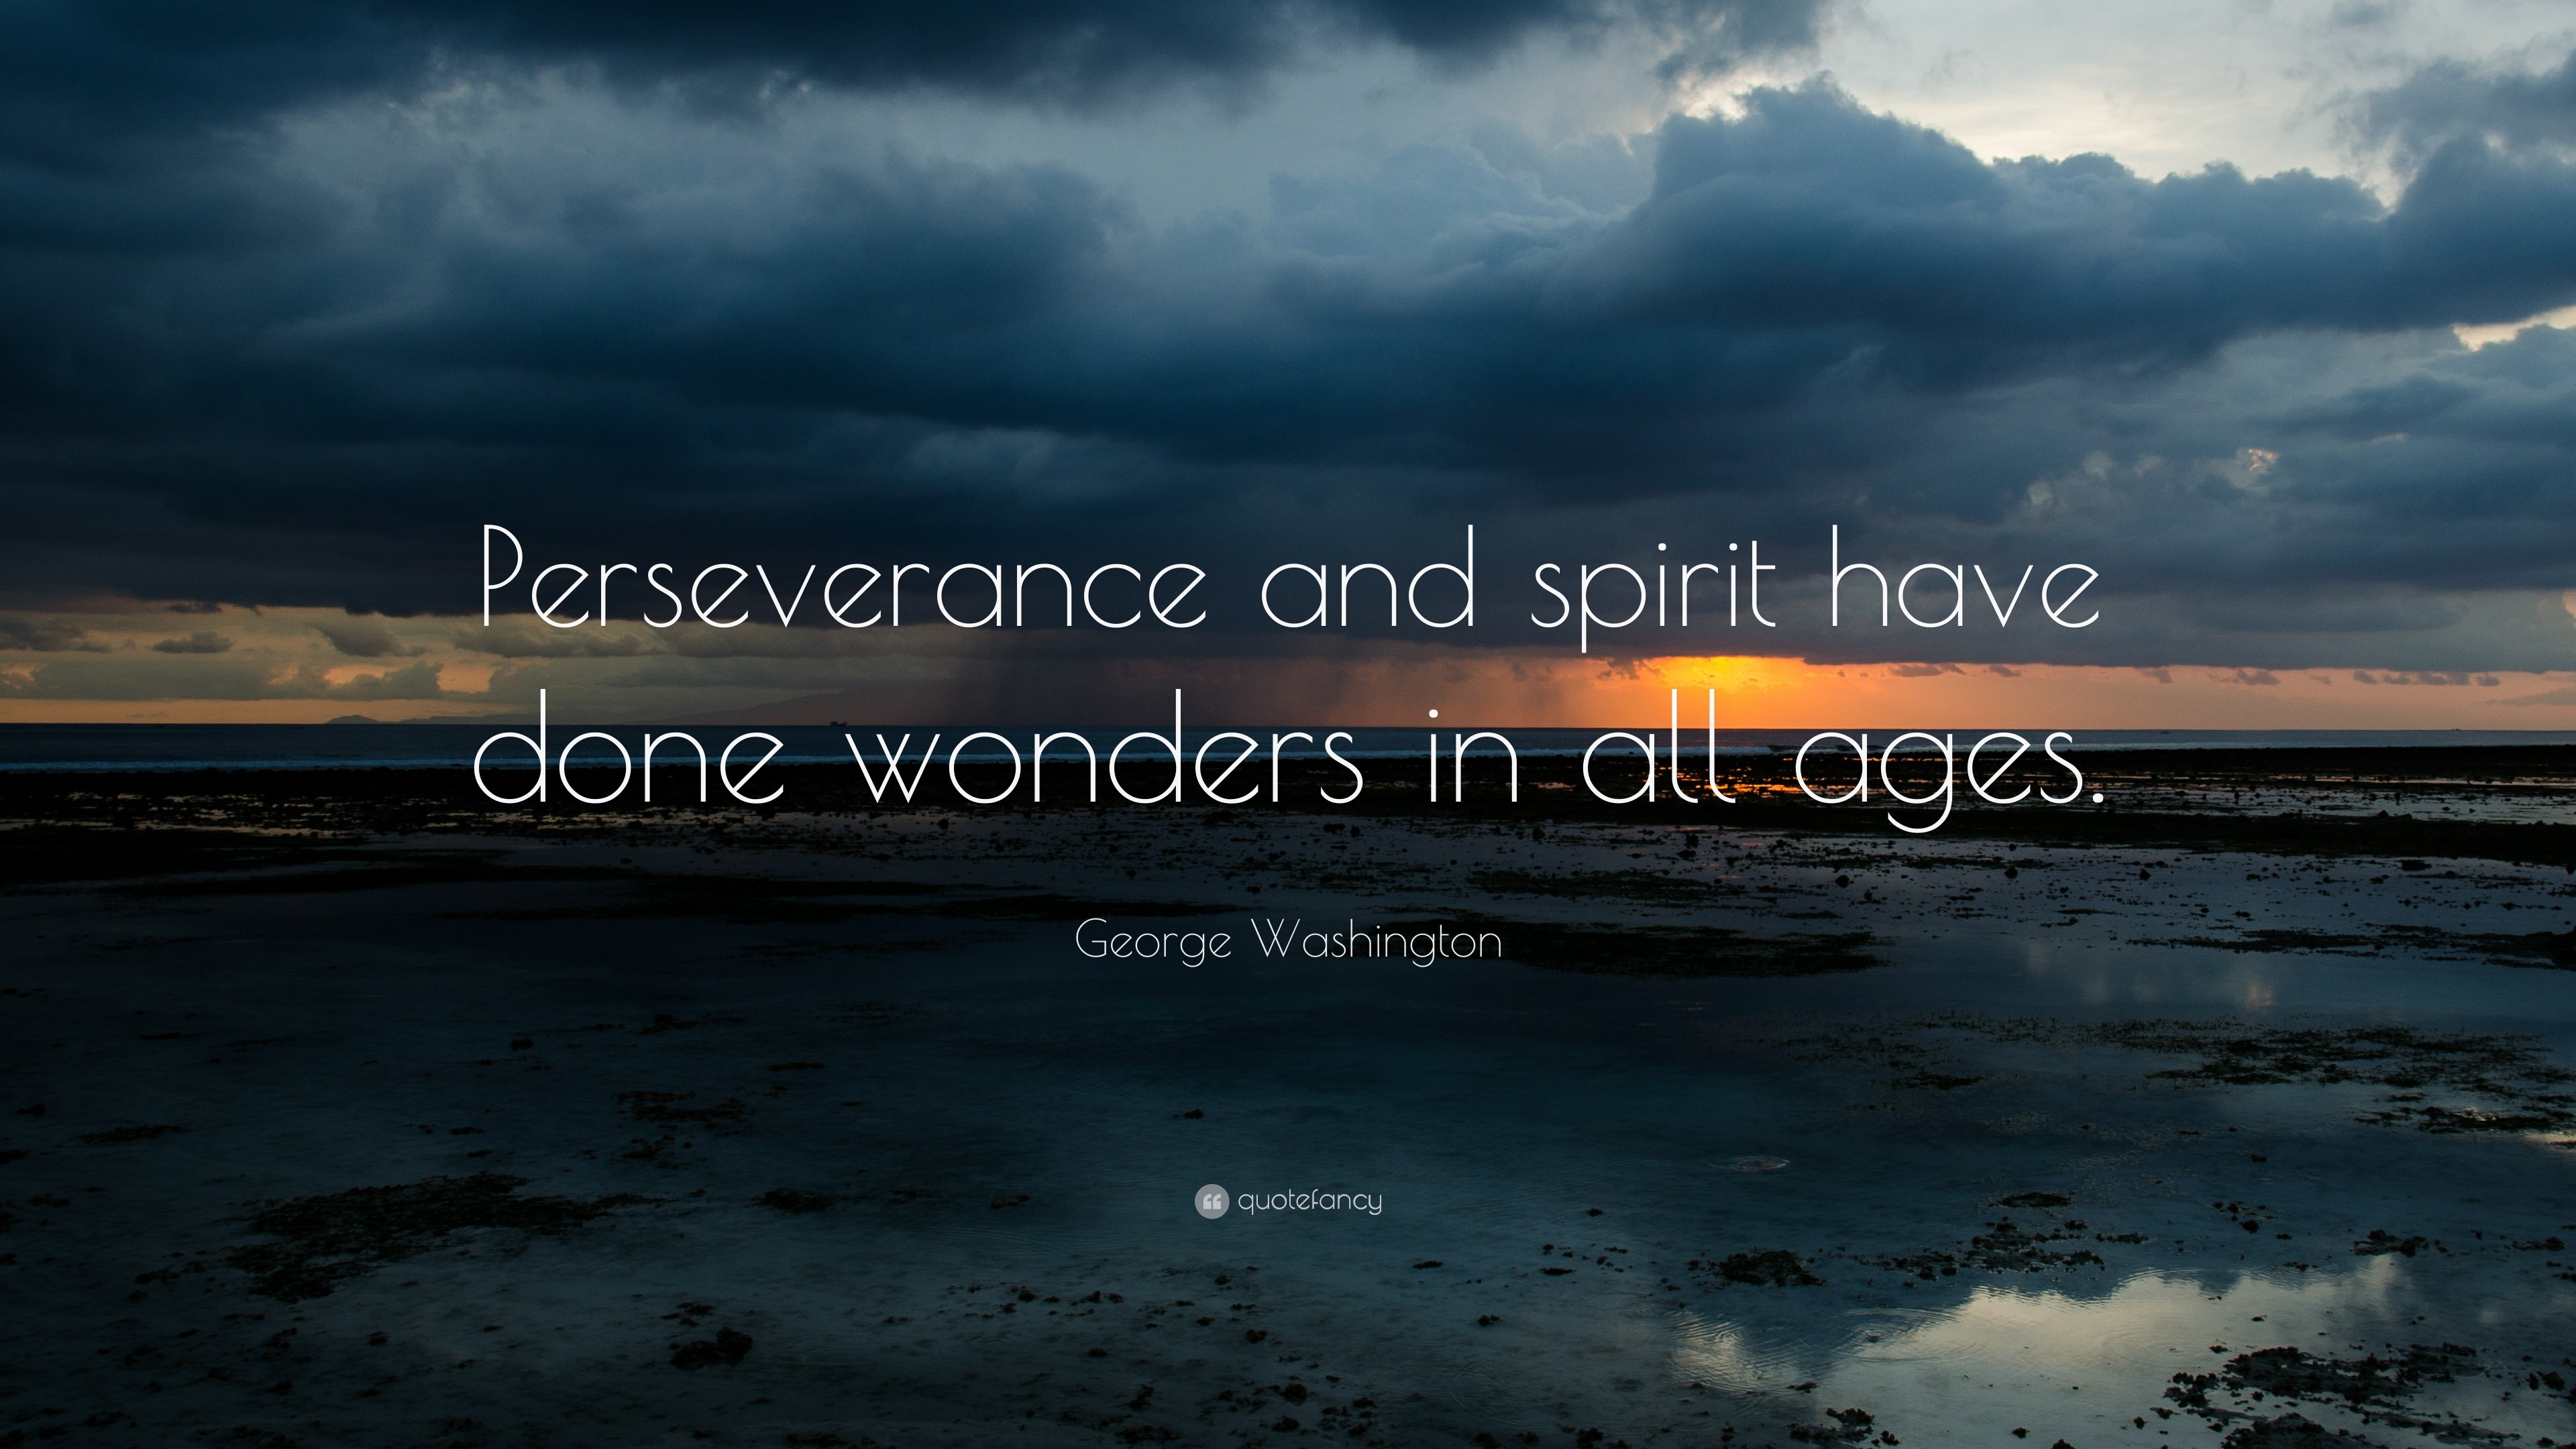 George Washington Quote: “Perseverance and spirit have done wonders in